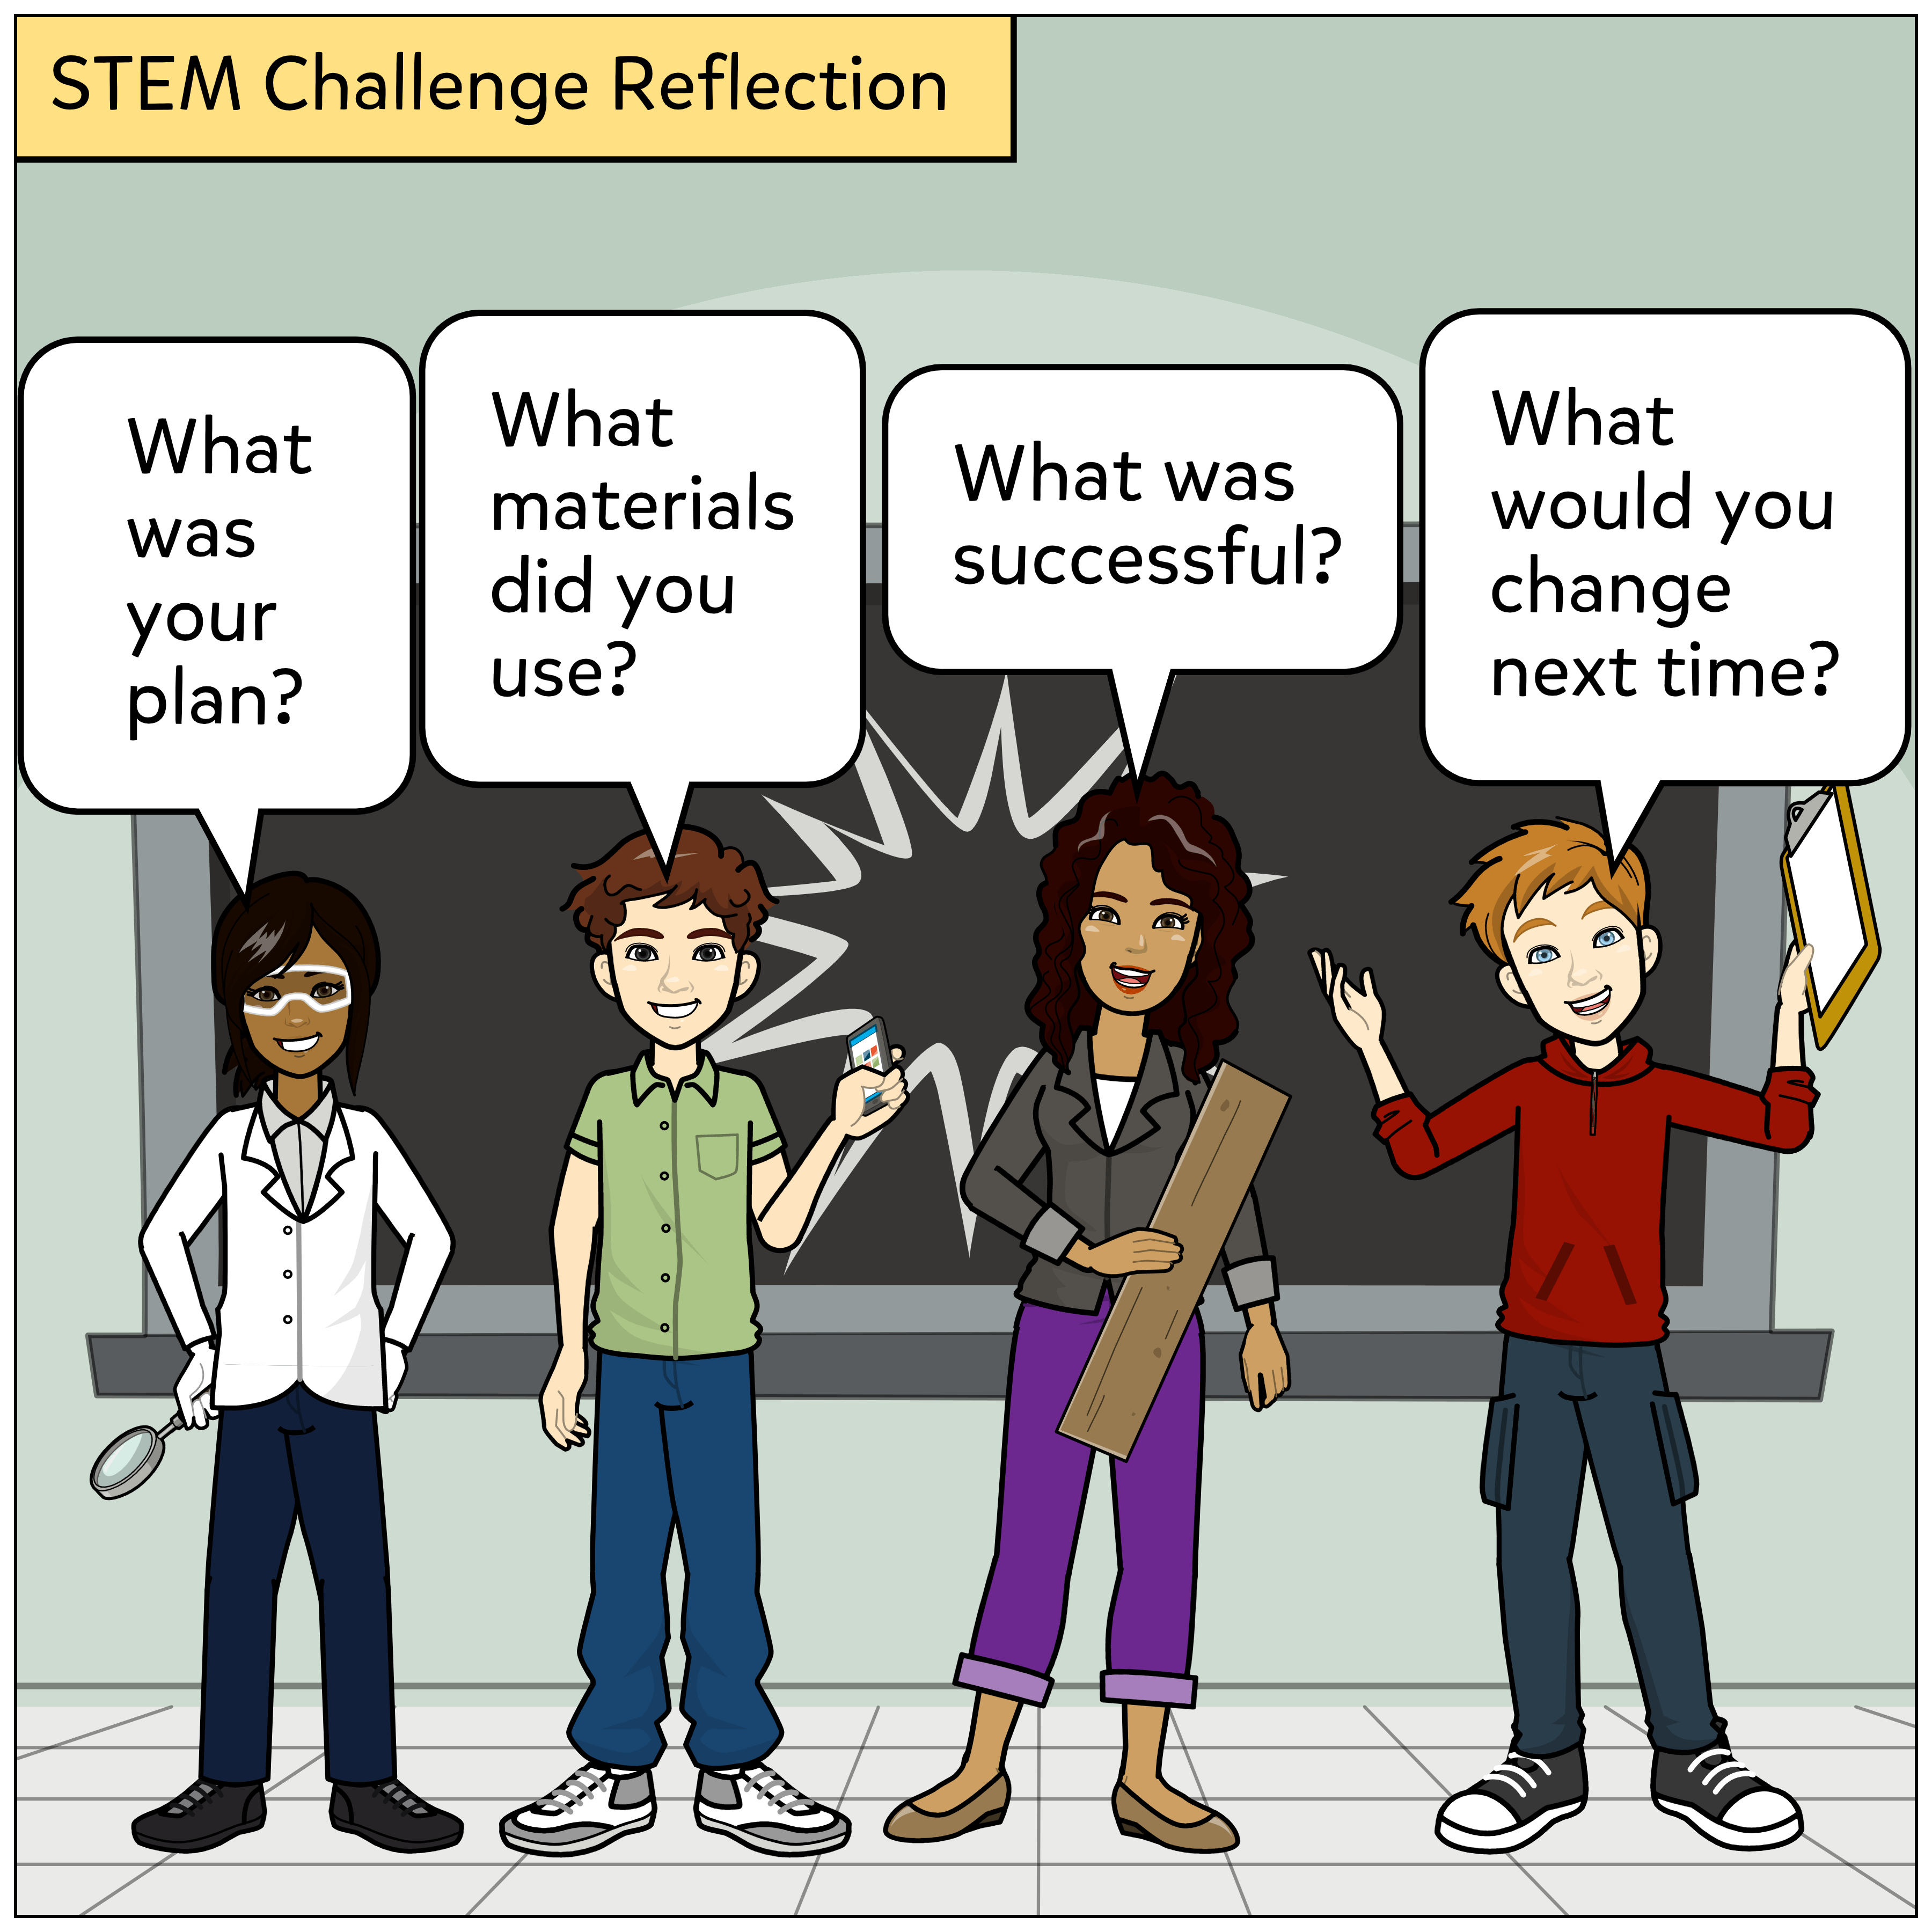 4th_5th_6th_7th_stem_challenge_reflection_sample@3-1